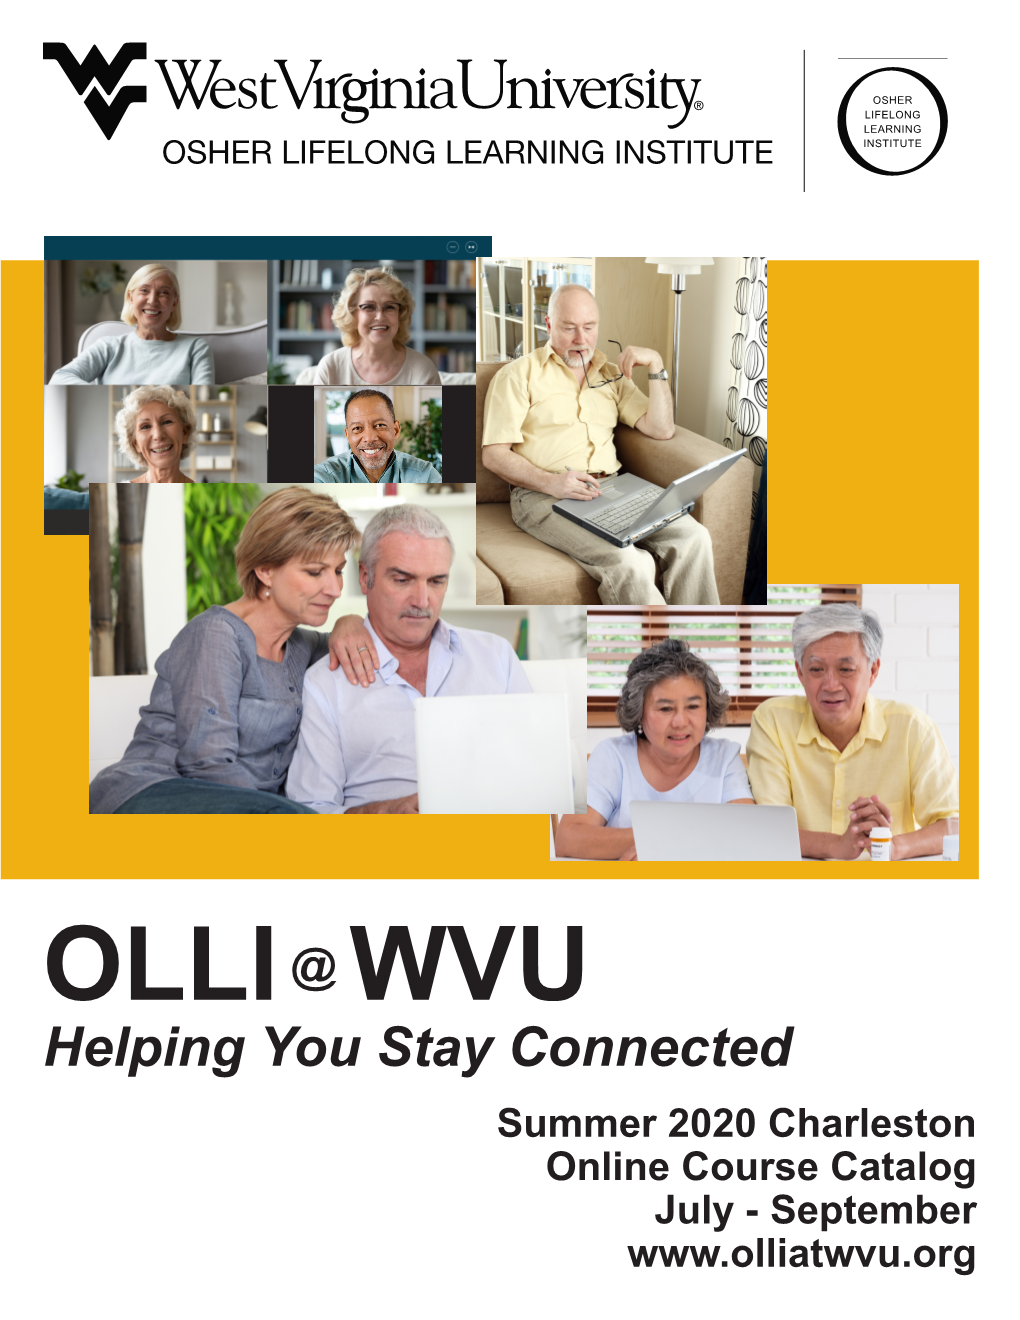 Charleston Online Course Catalog July - September About OLLI at WVU Table of Contents